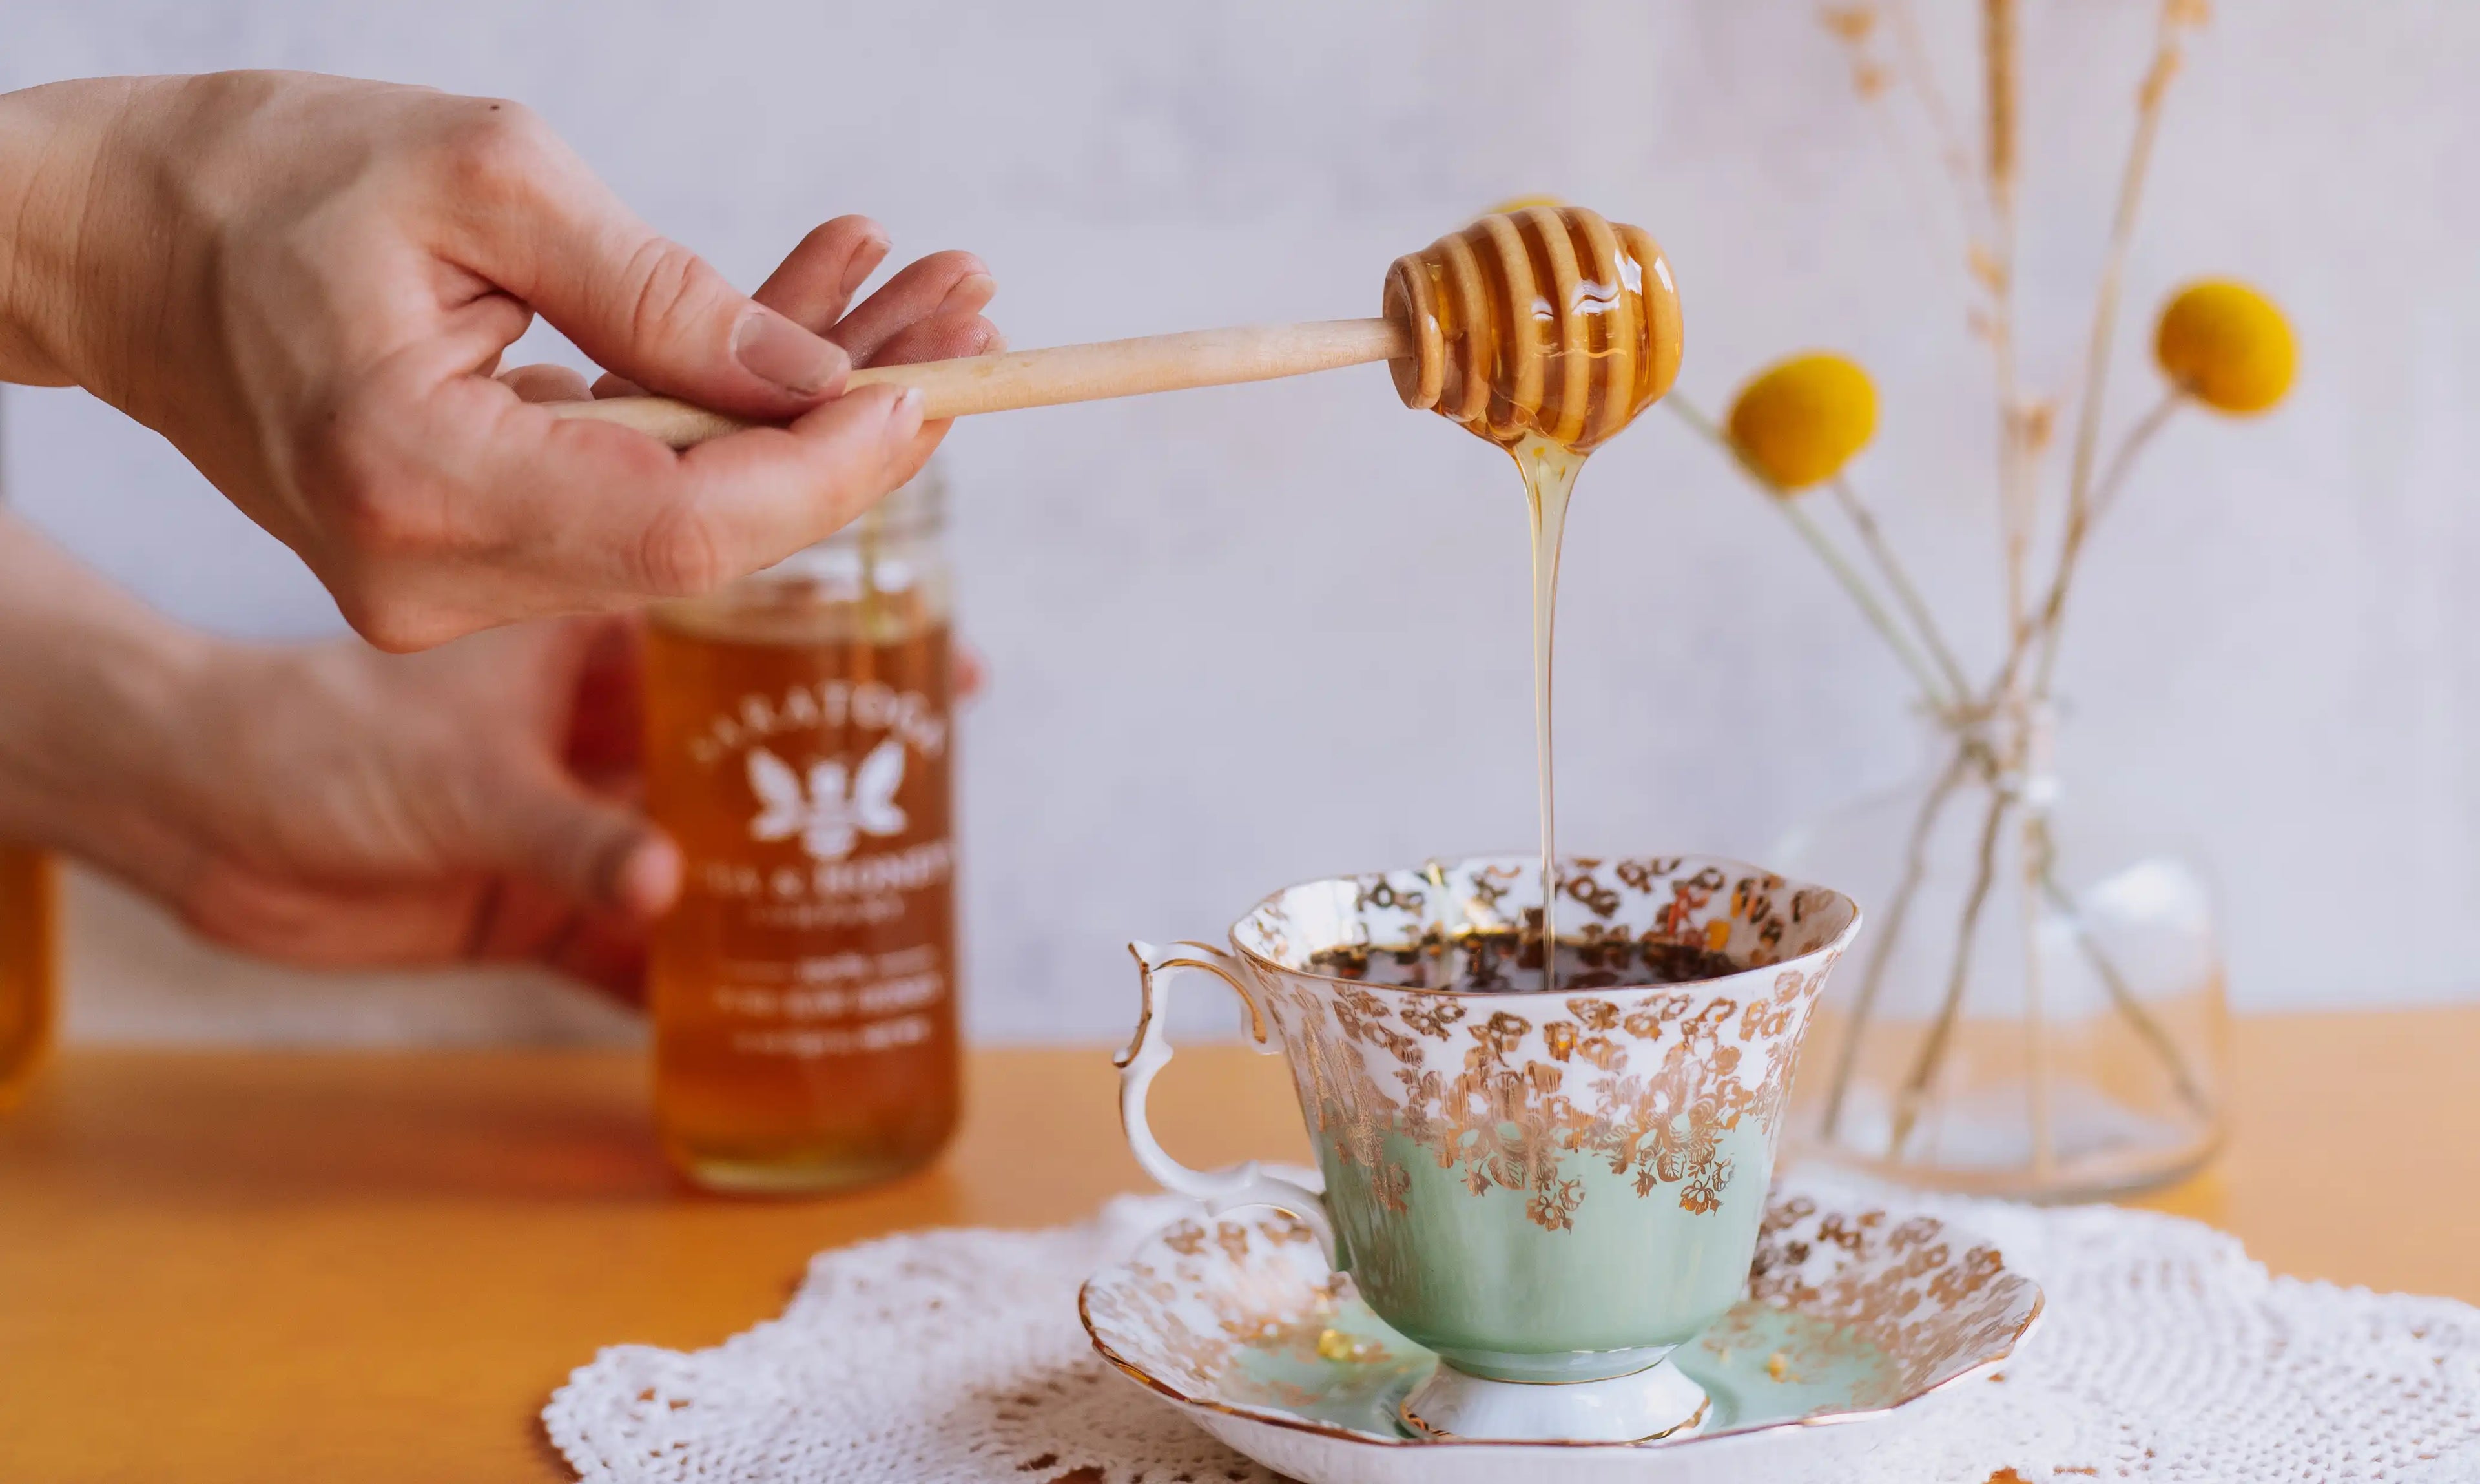 hand holding honey dipper drizzling honey into a mint colored vintage tea cup with jar of saratoga tea and honey co in the background